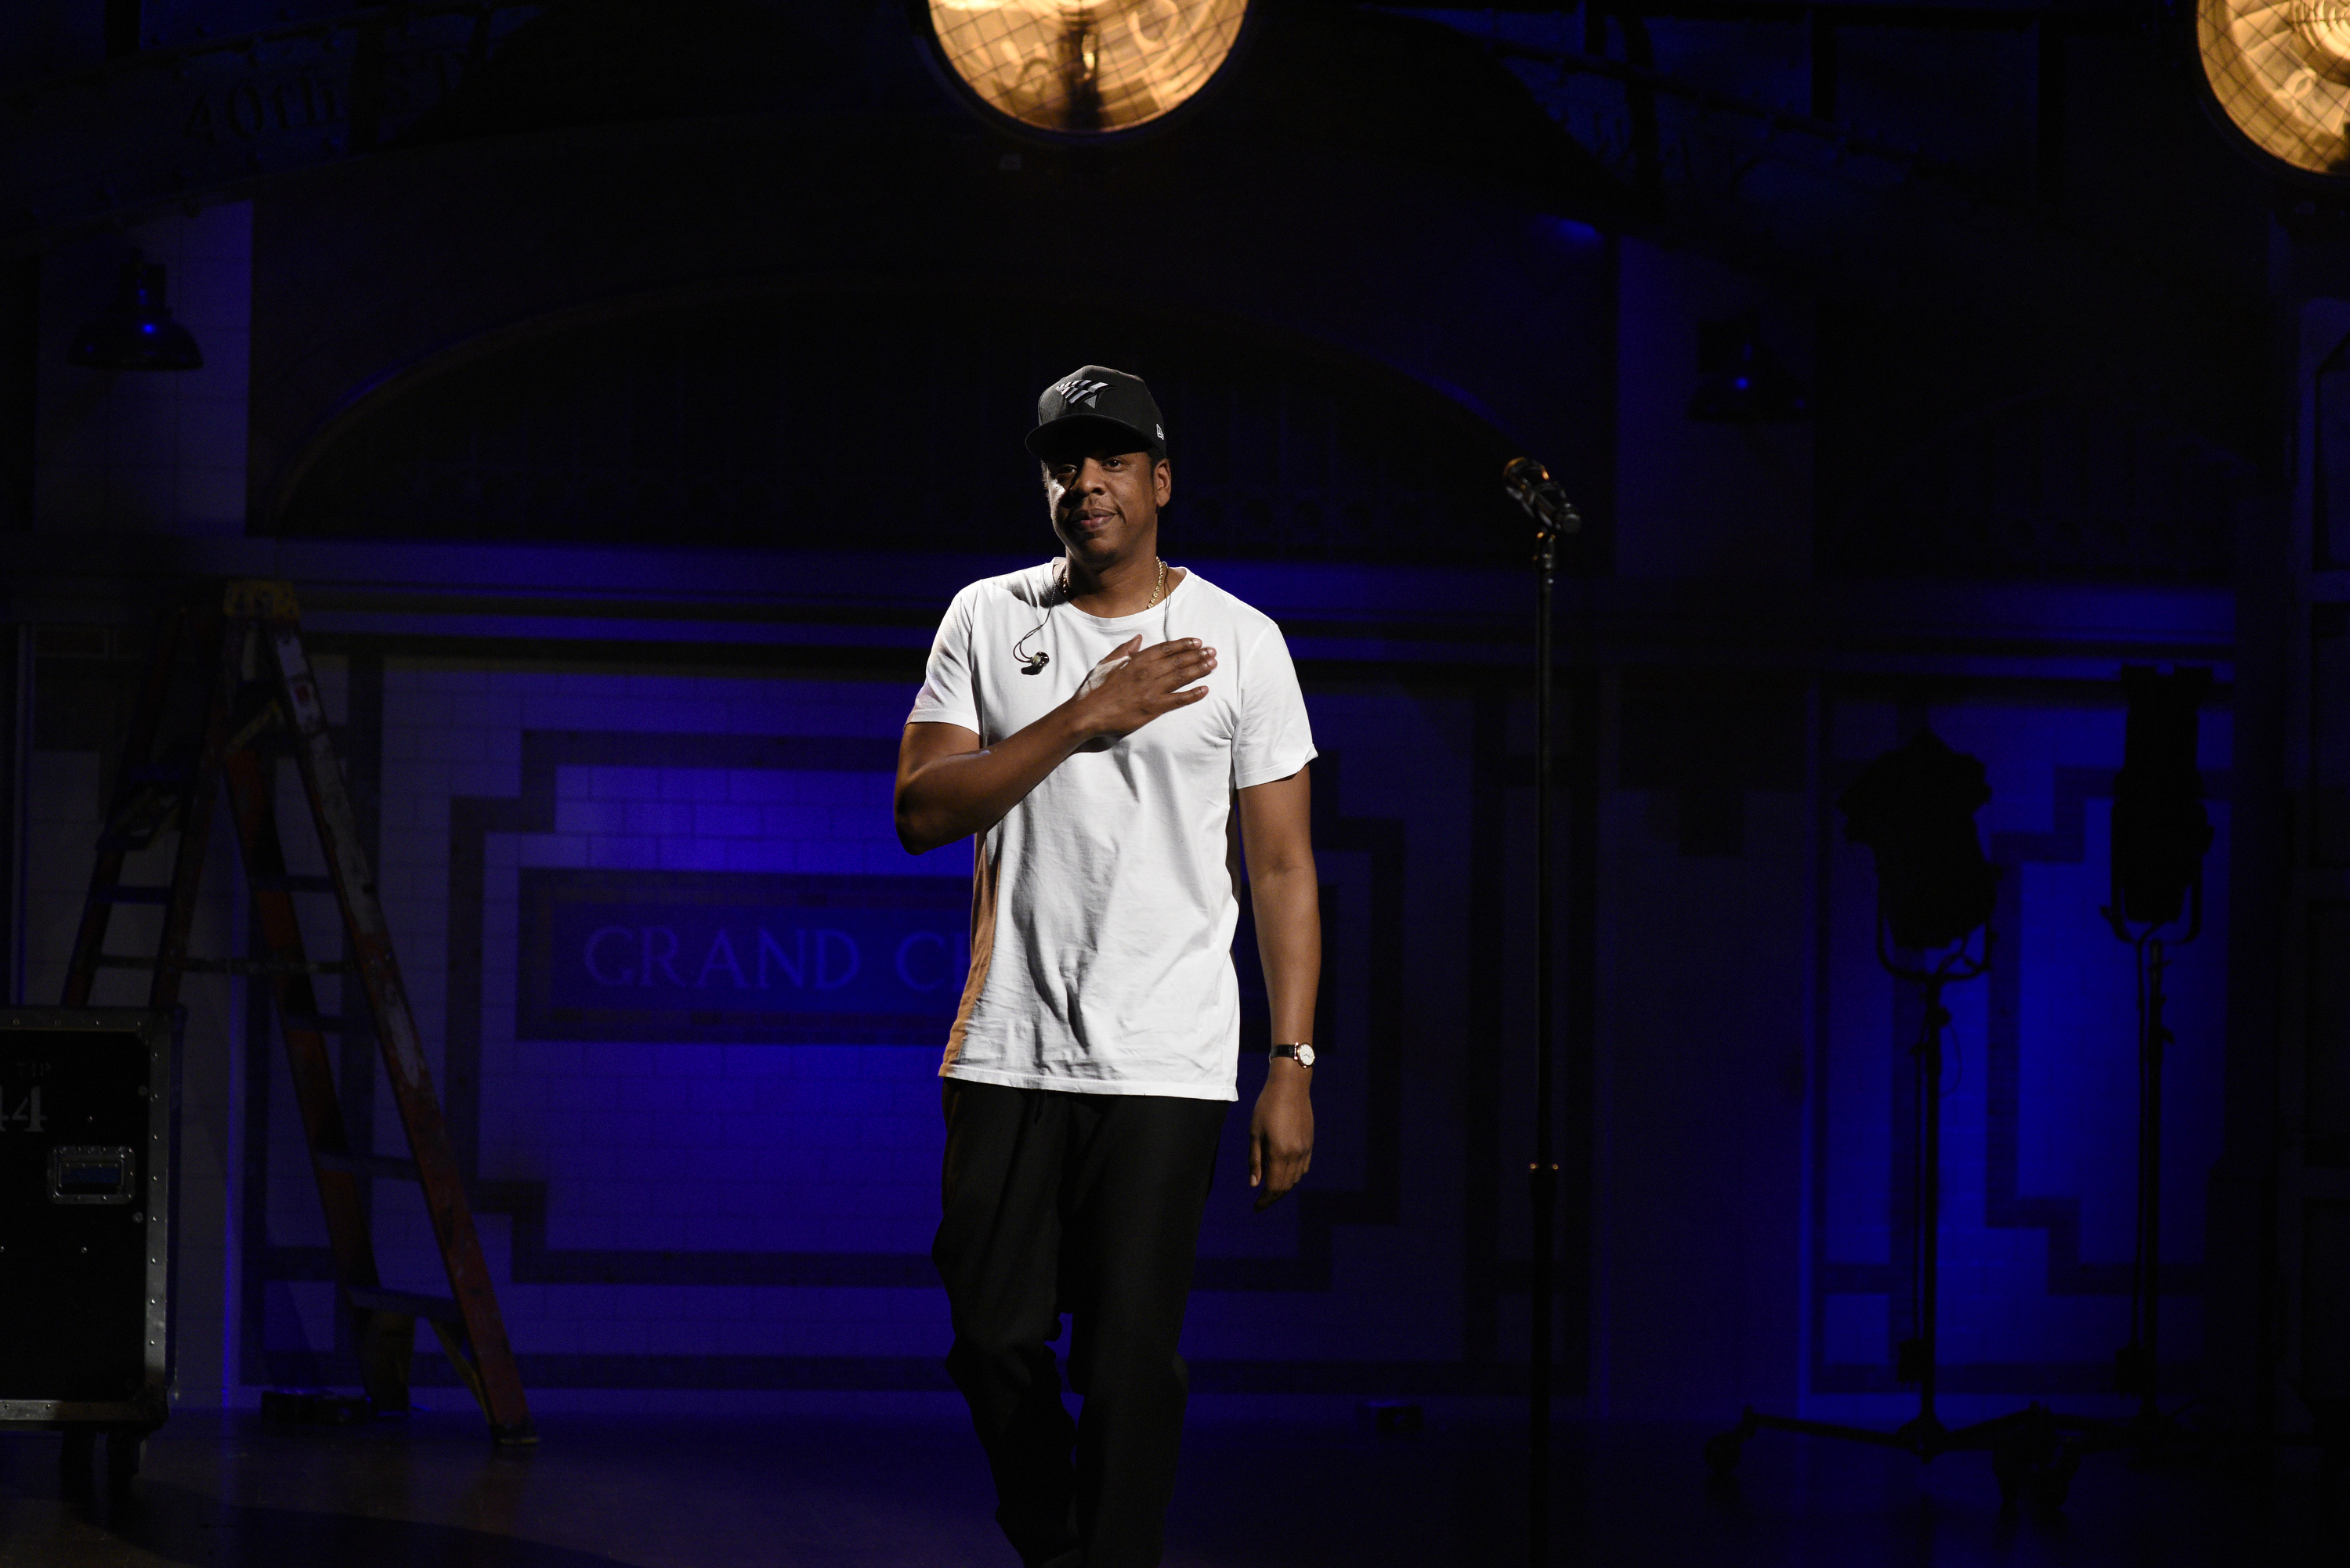 SATURDAY NIGHT LIVE -- "Ryan Gosling" Episode 1726 -- Pictured: Musical Guest Jay-Z performs "Air" in studio 8H on September 30, 2017 -- (Photo by: Will Heath/NBC/NBCU Photo Bank via Getty Images) (NBC&mdash;NBCU Photo Bank via Getty Images)